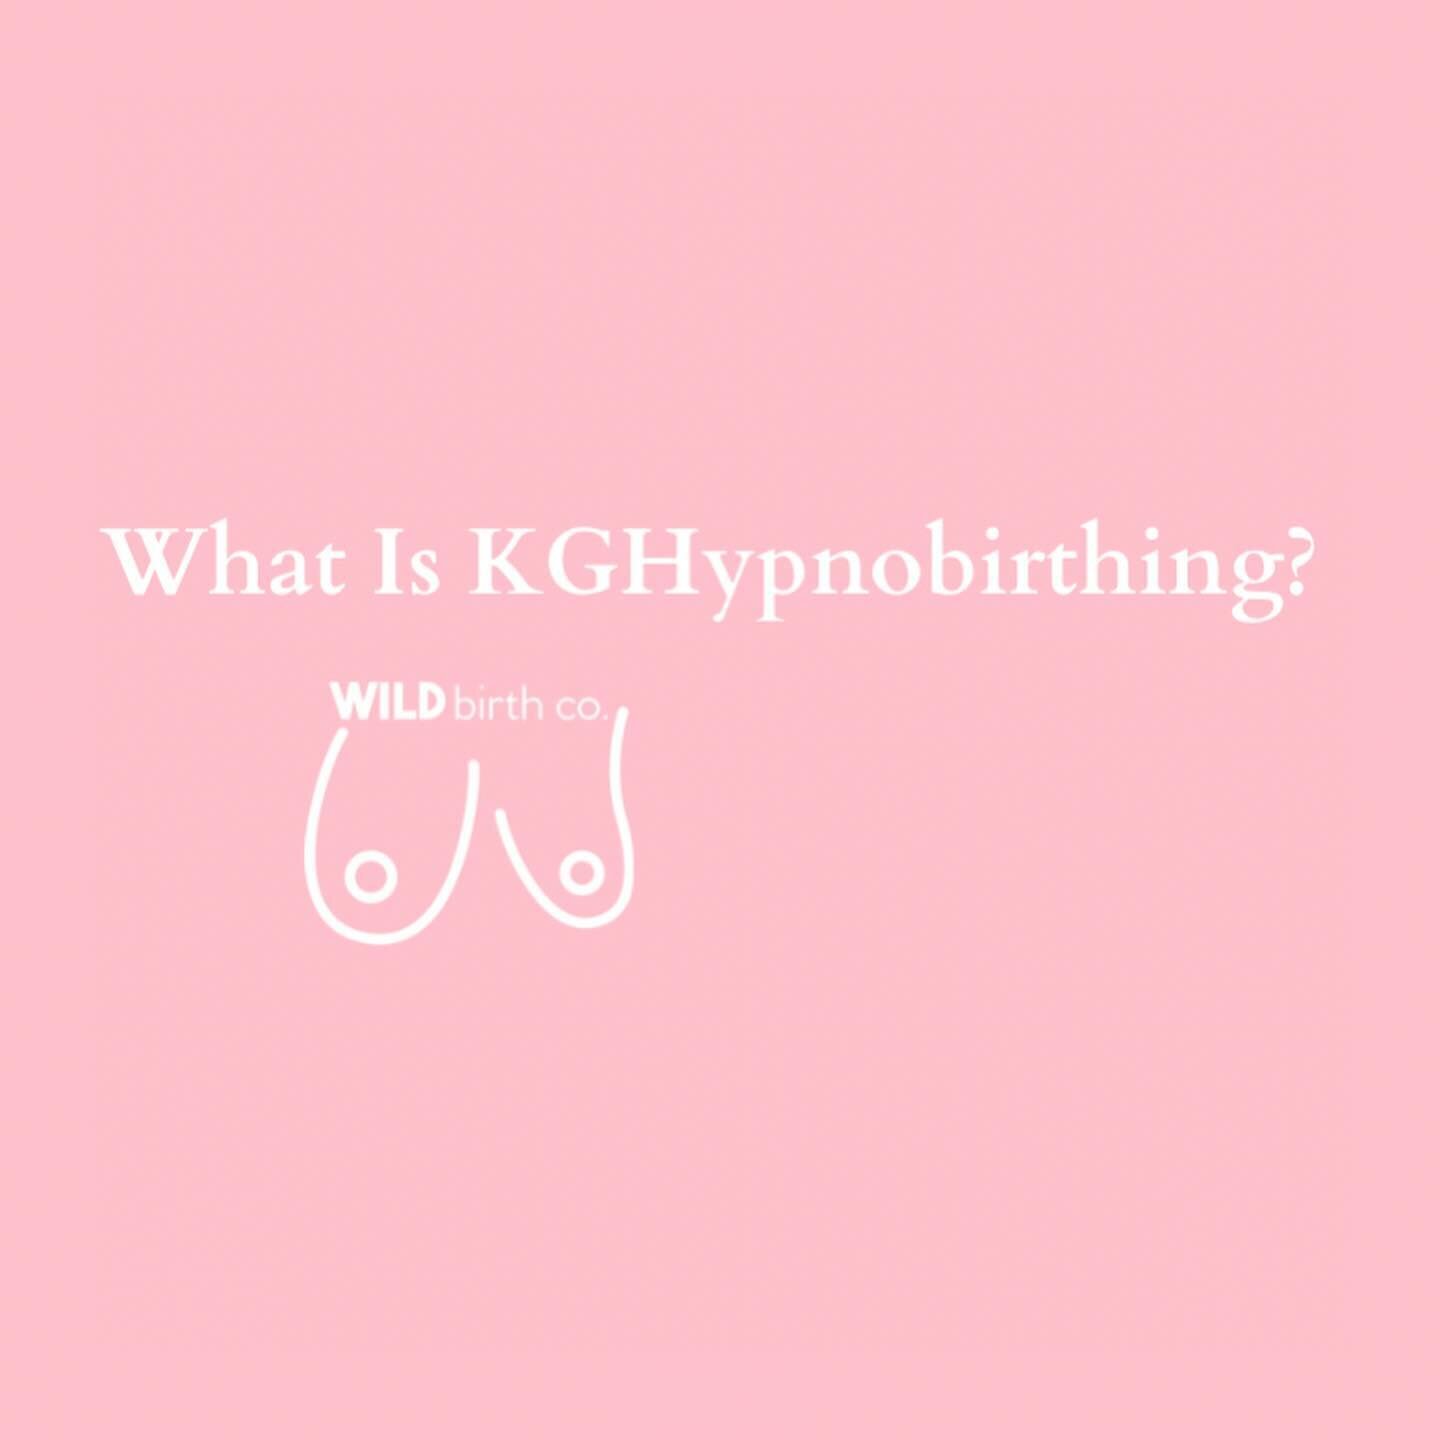 KGHypnobirthing teaches a woman to work with her body, which is naturally designed to give birth. It releases fear and negativity that she has been preprogrammed with from an early age and replaces it with confidence 🌸